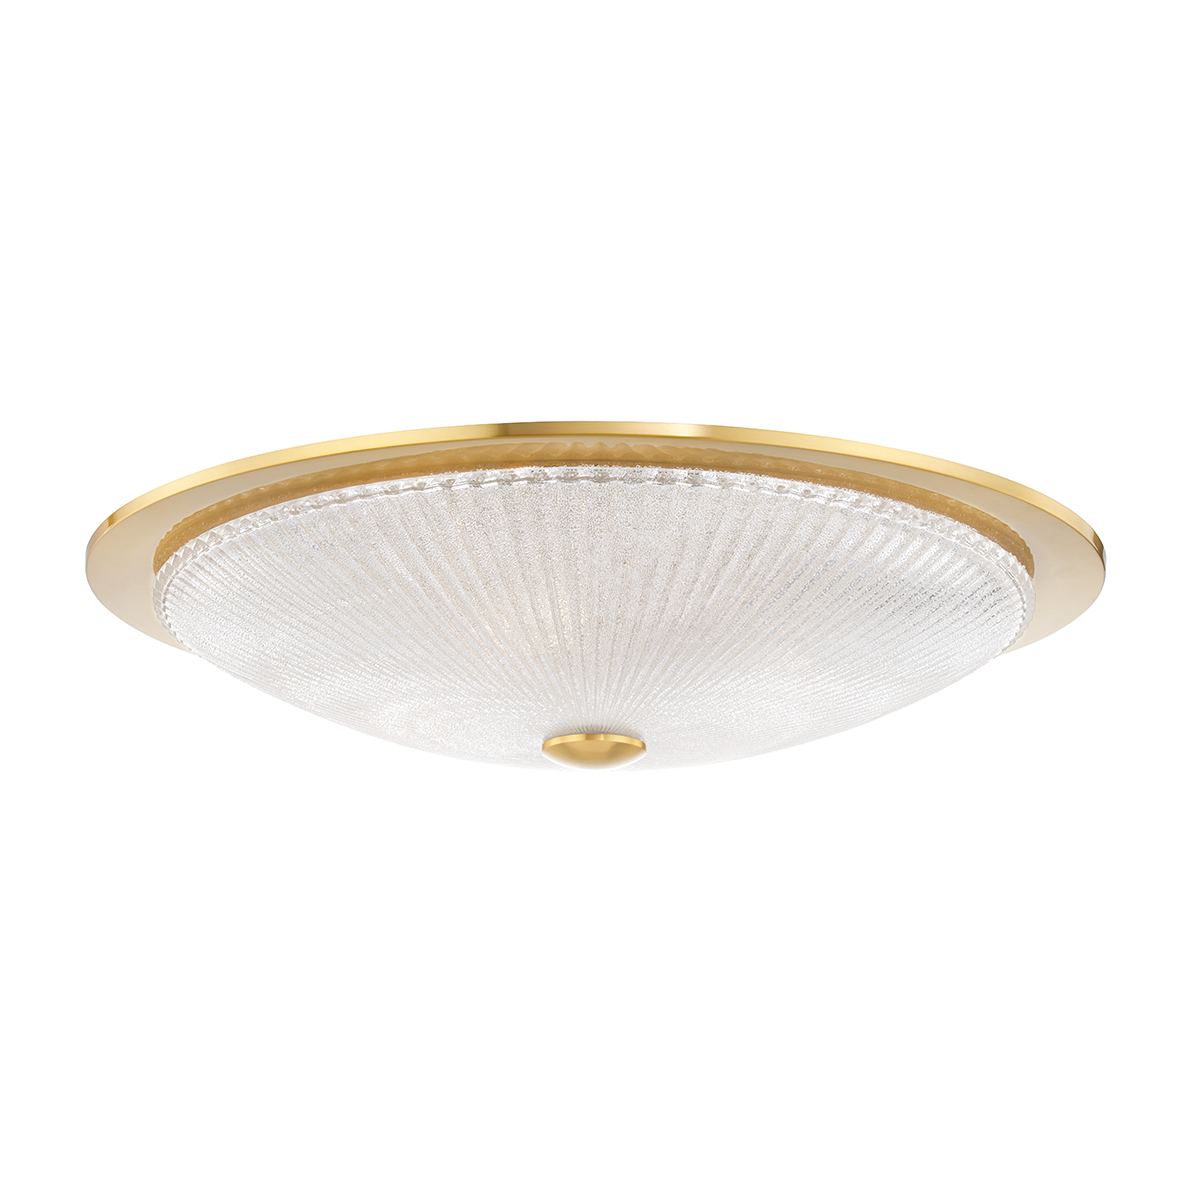 Steel with Piastra Glass Shade Round Flush Mount